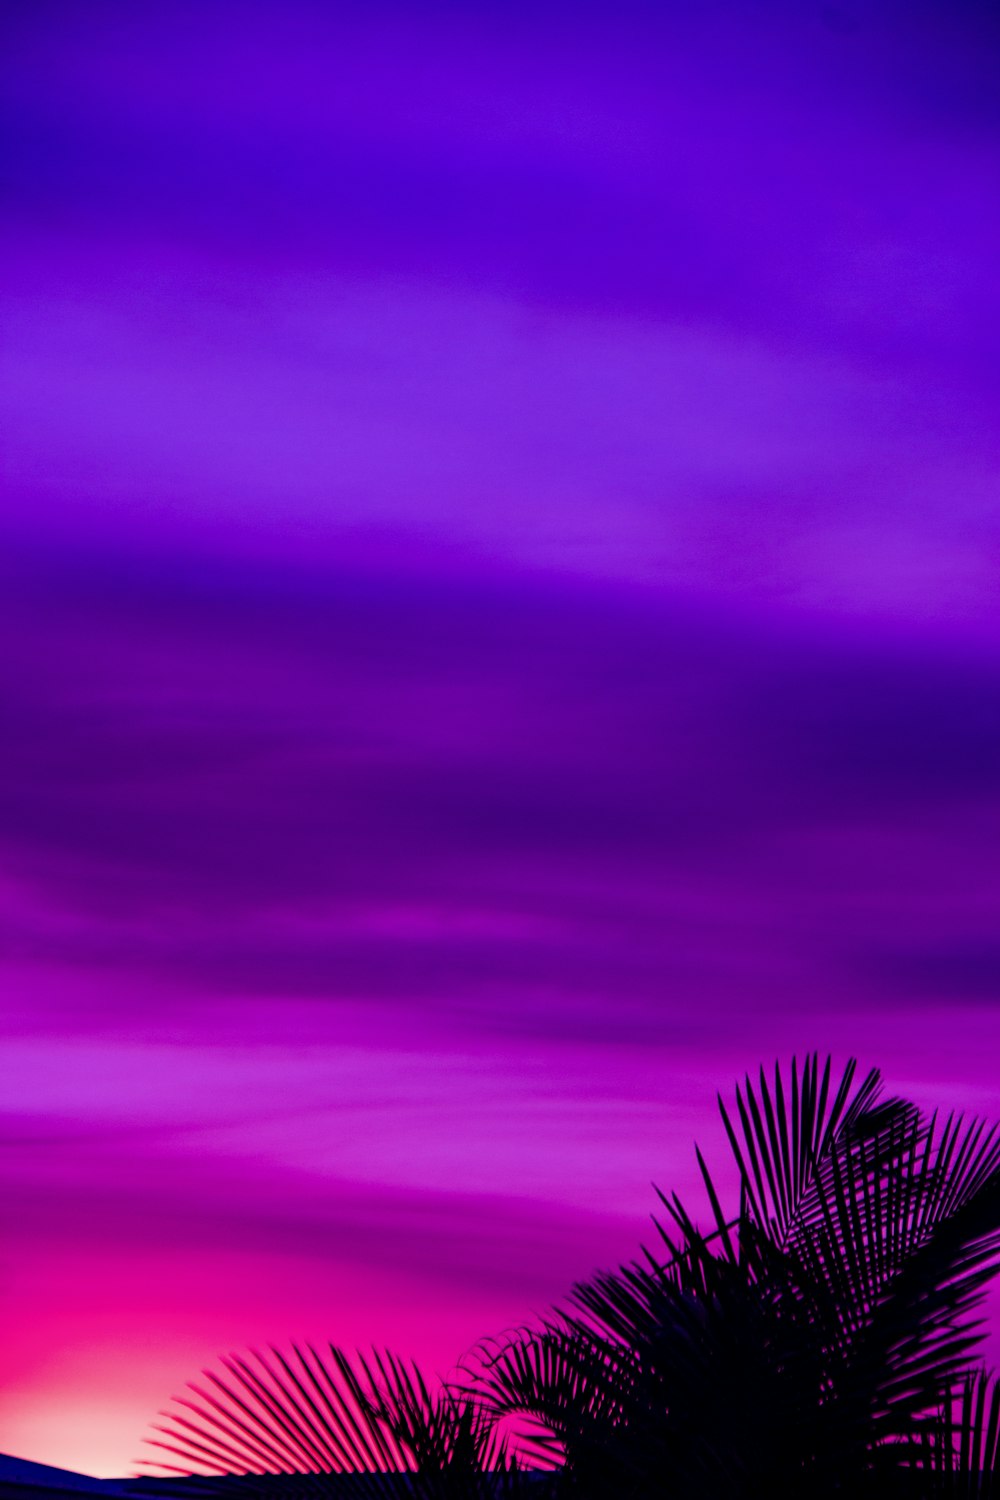 Purple Wallpaper Pictures | Download Free Images on Unsplash